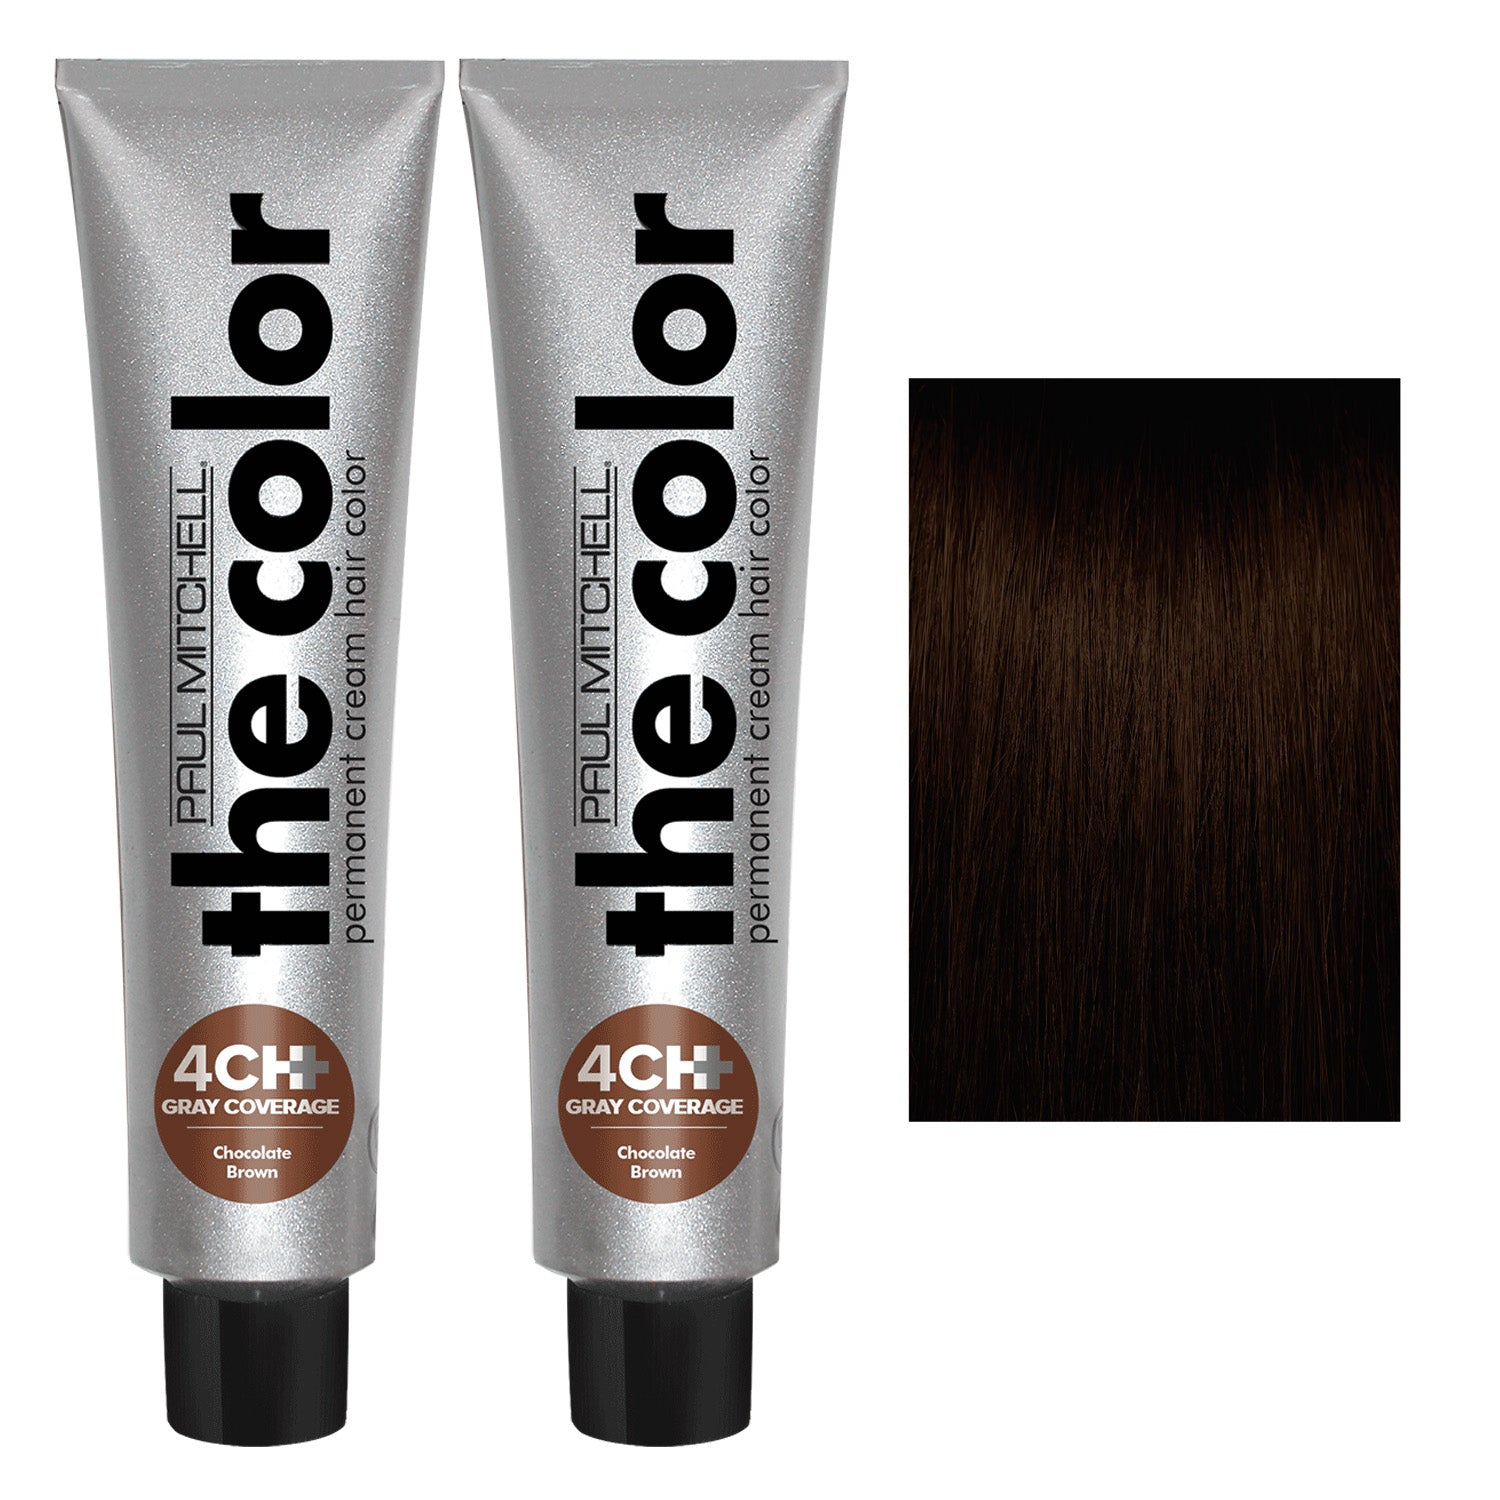 cHOCOLAGE bROWN CREAM PERMANENT HAIR COLORPaul Mitchell the Color Gray Coverage 4CH+ 3oz 